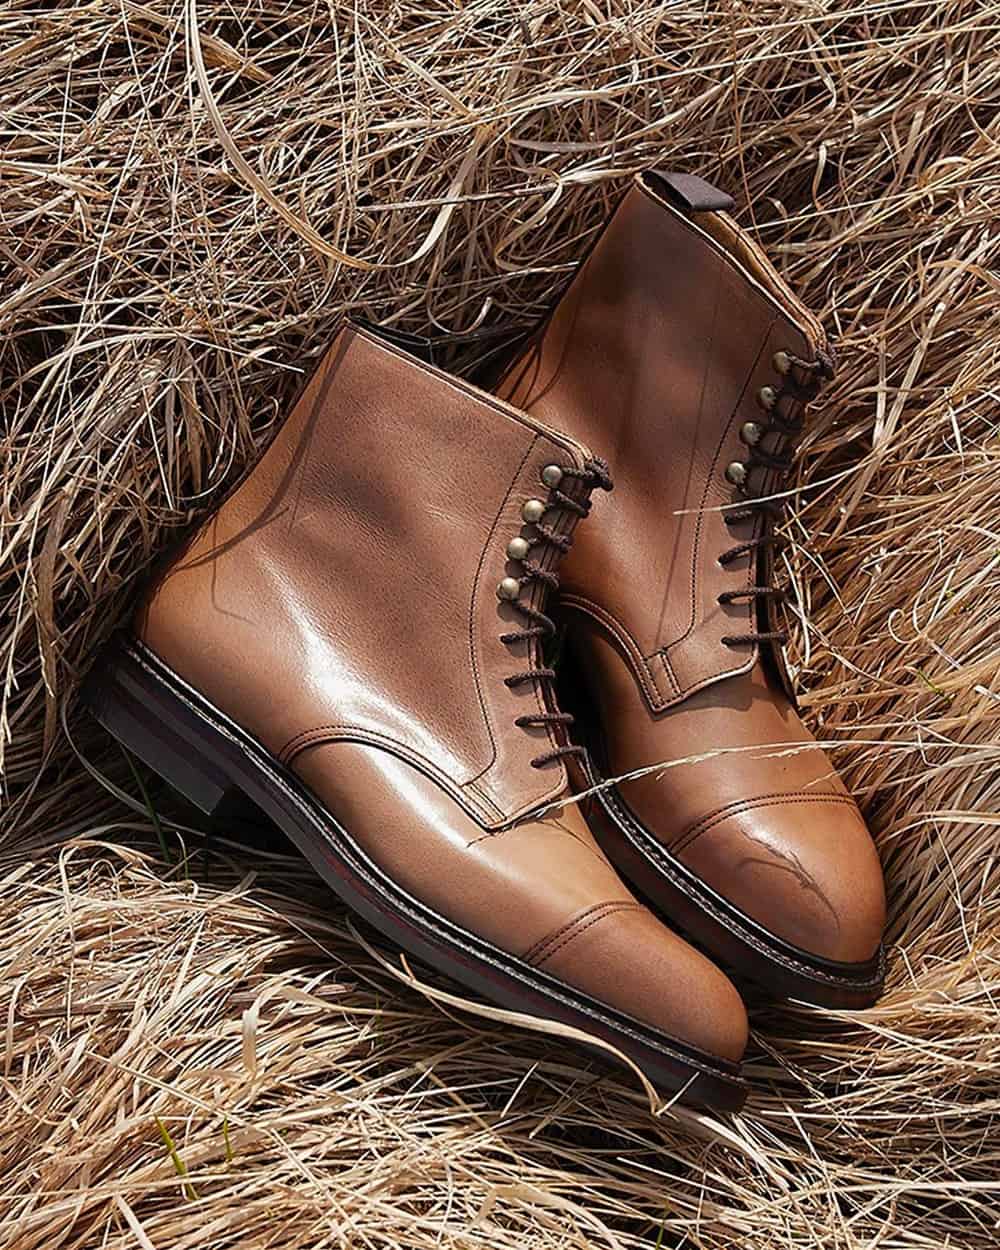 A pair of Crockett & Jones light brown leather men's military boots on a hay bale